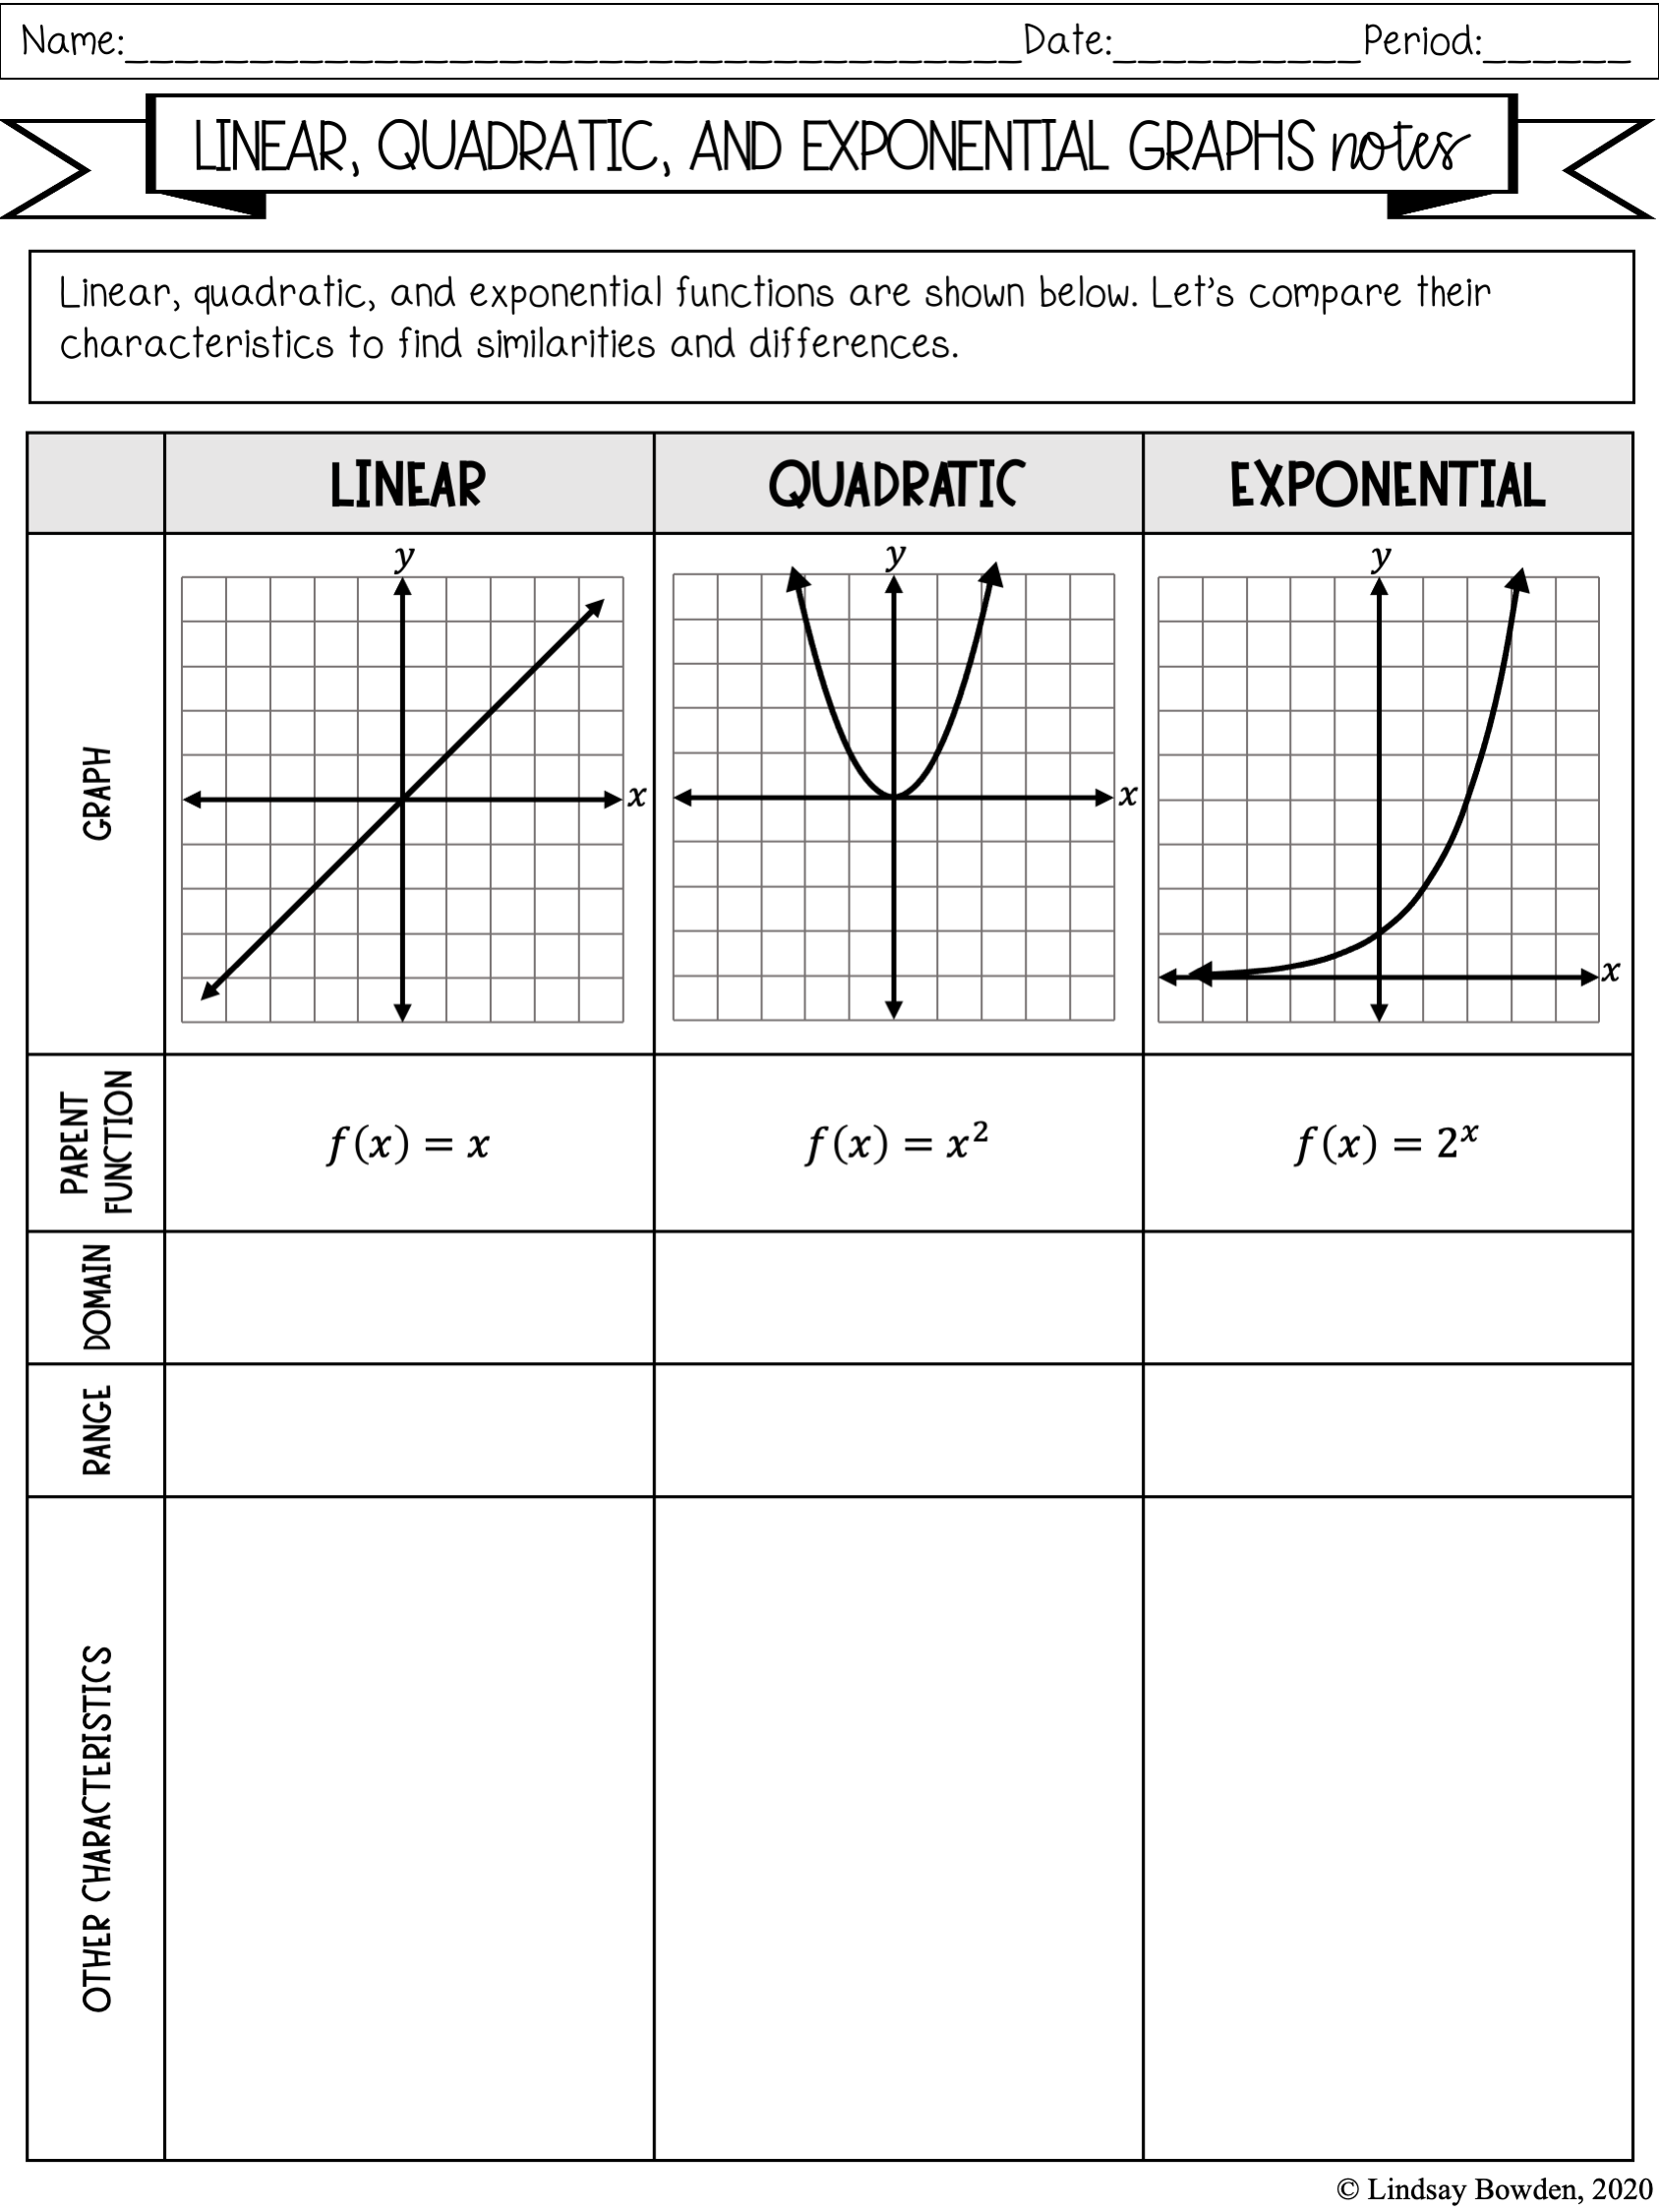 Linear, Quadratic, Exponential Notes and Worksheets - Lindsay Bowden In From Linear To Quadratic Worksheet